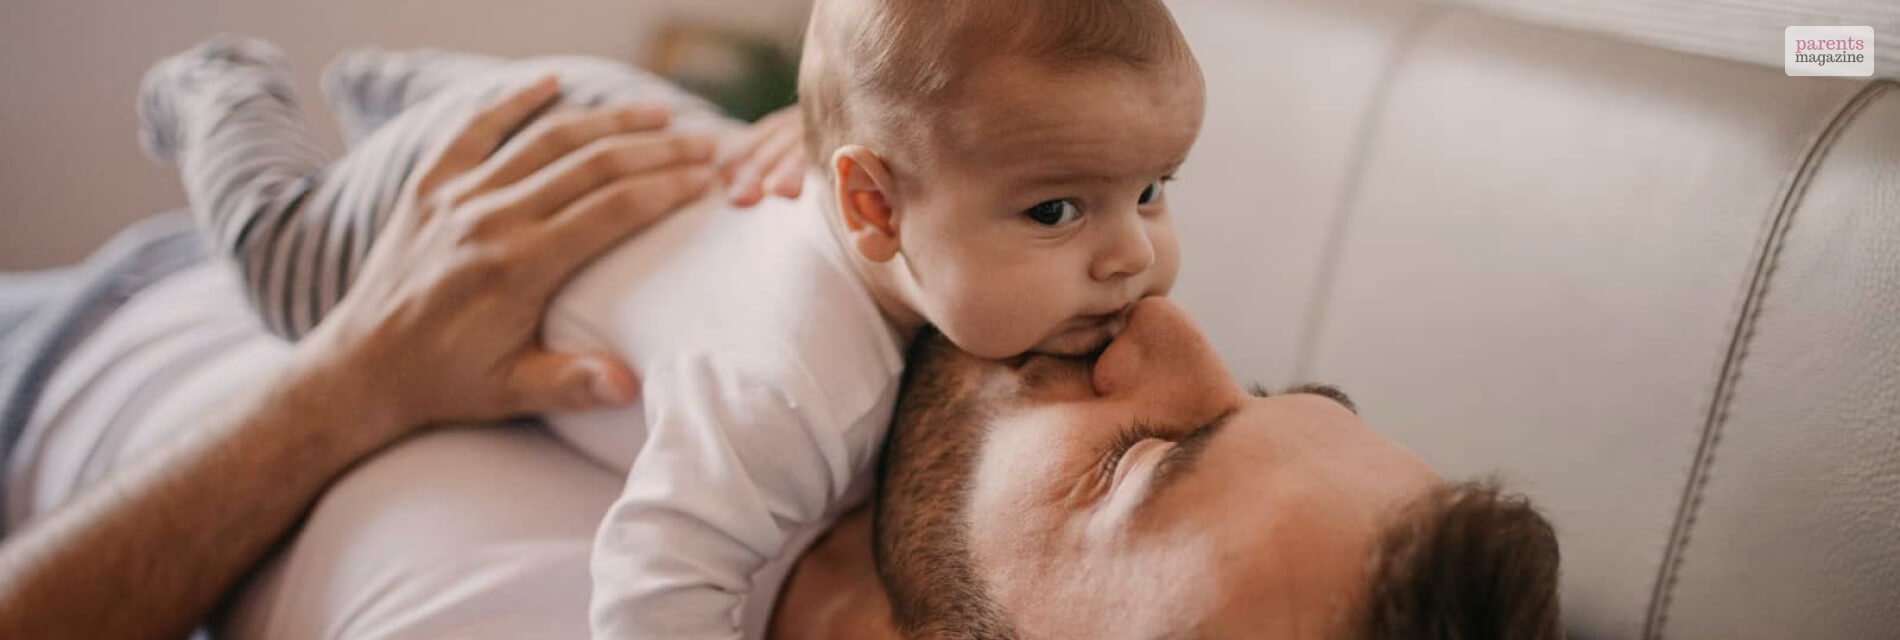 preparing-for-fatherhood-essential-tips-and-advice-for-expectant-dads